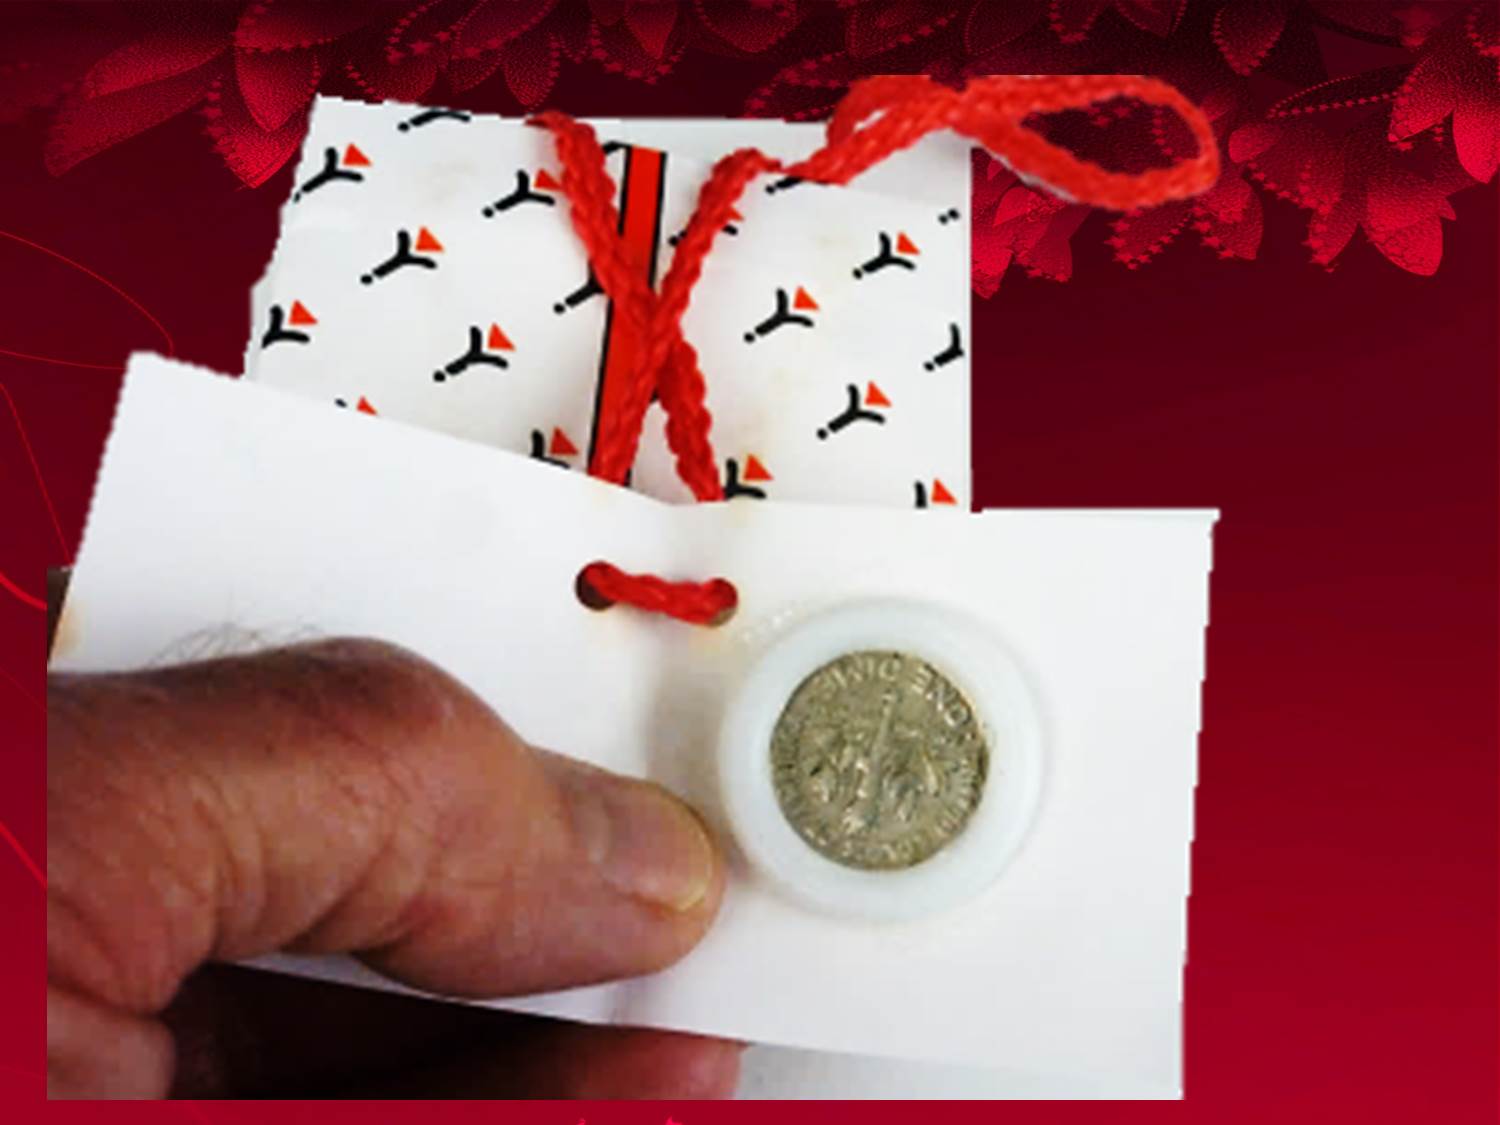 When the gift tag is opened, spectator sees a "Dime n' Ring"!  Spectator is given a dime 'n ring as a souvenir.  Sensational, unforgettable mentalism with an unexpected ending.  Pure Entertainment!